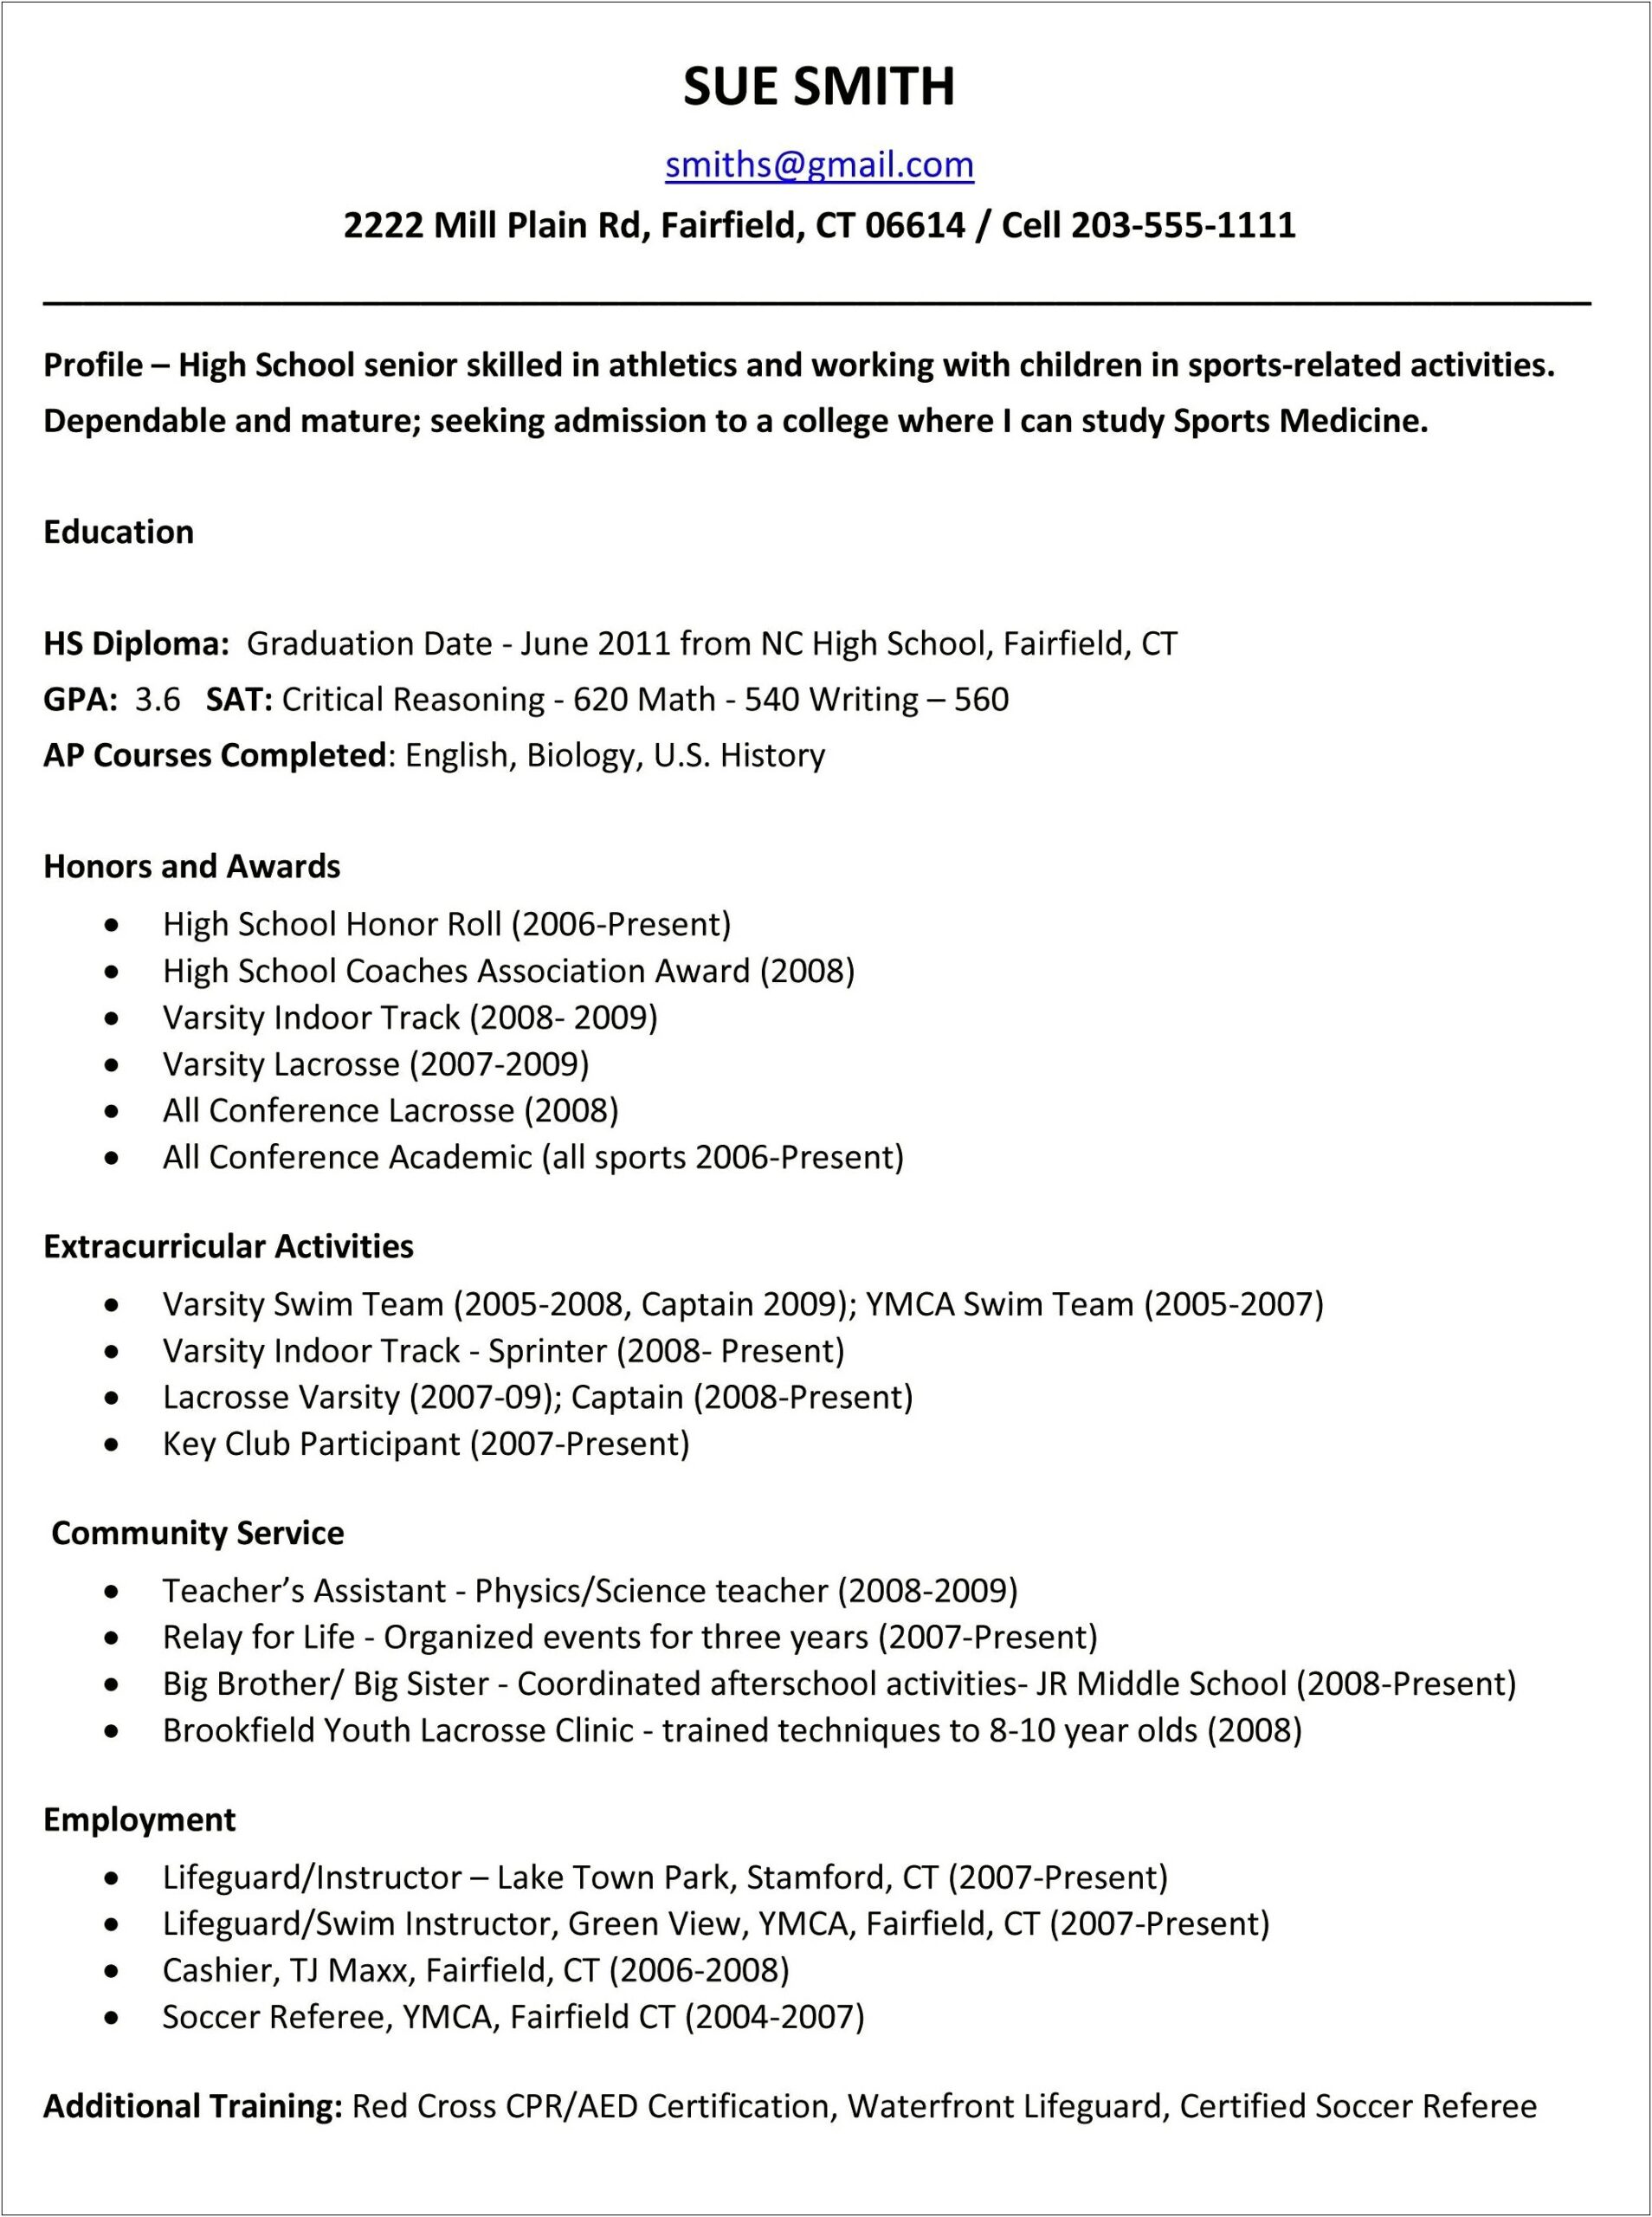 Example Of A College Admission Resume